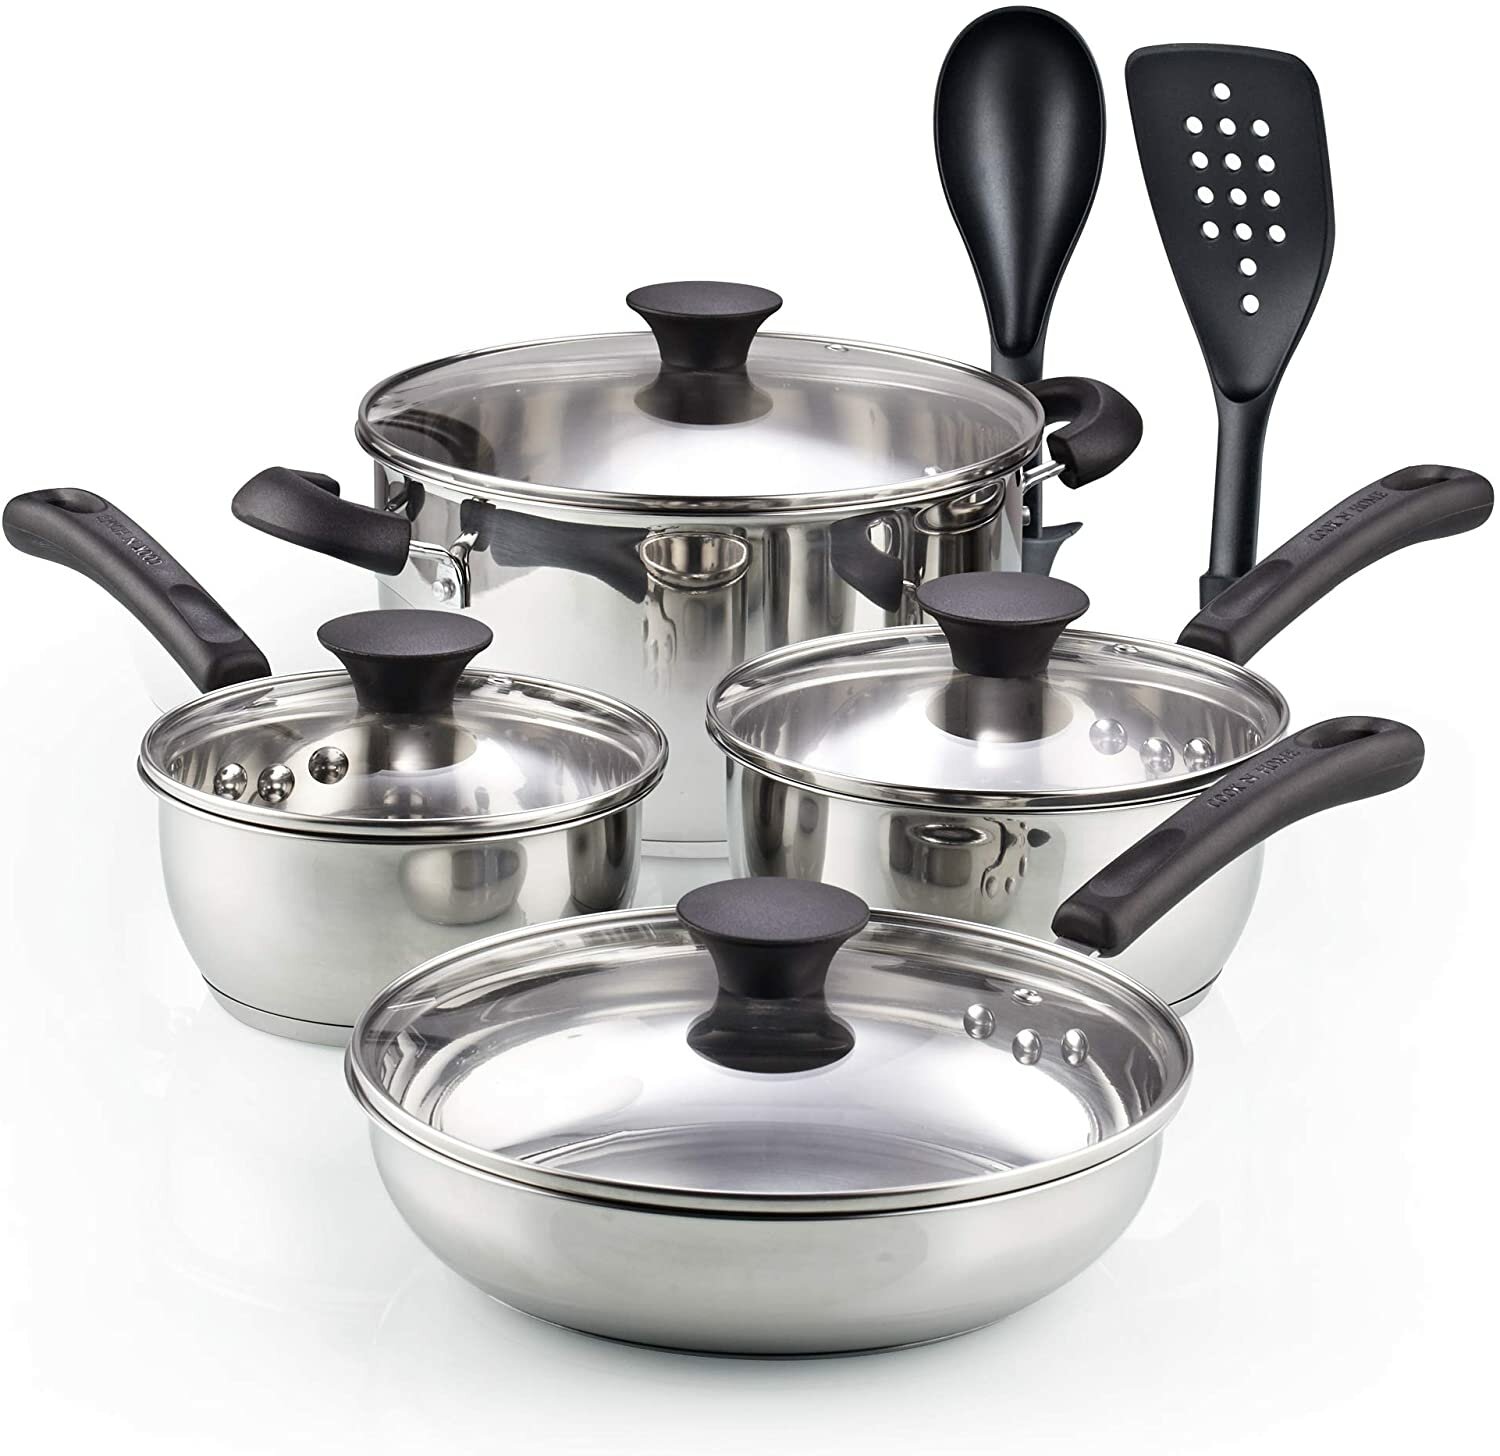 Cook N Home 02642 10 Pieces Stainless Steel Cookware Set Silver